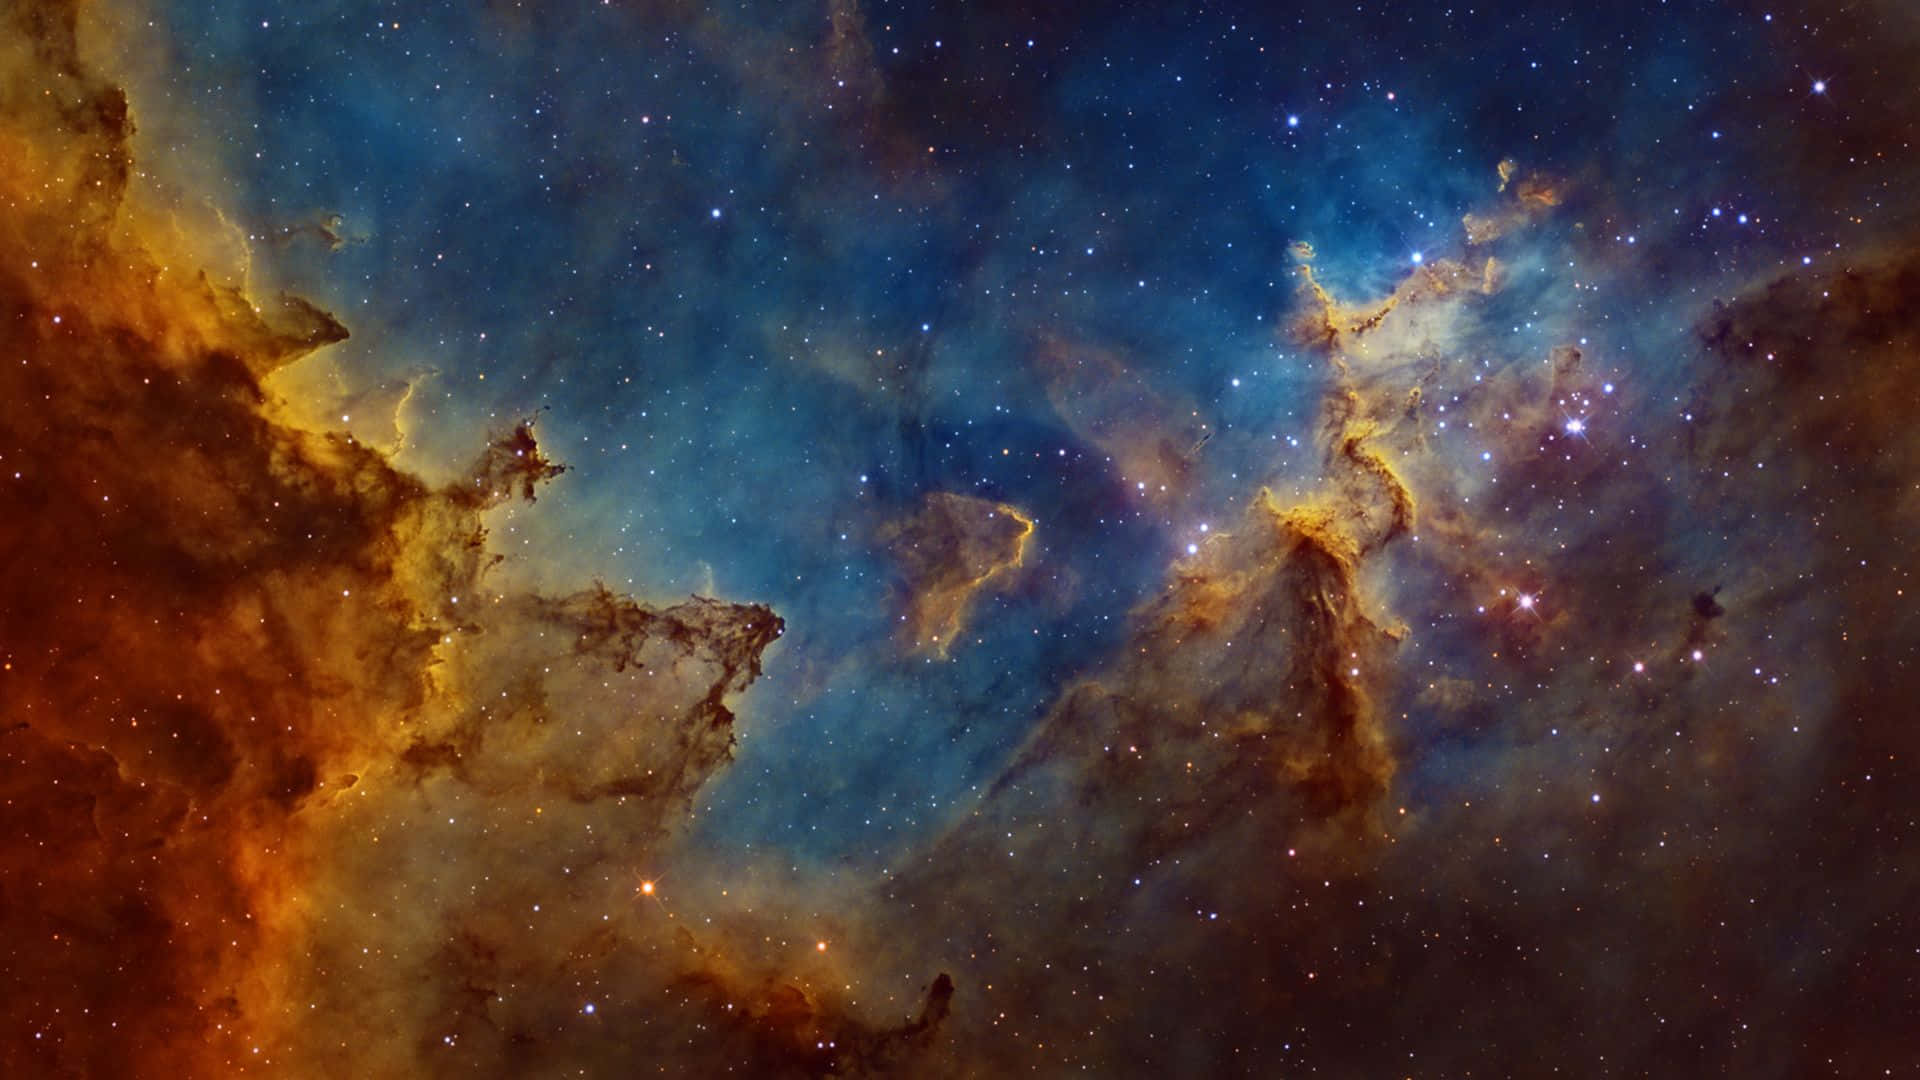 A beautiful star-filled space nebula in the sky